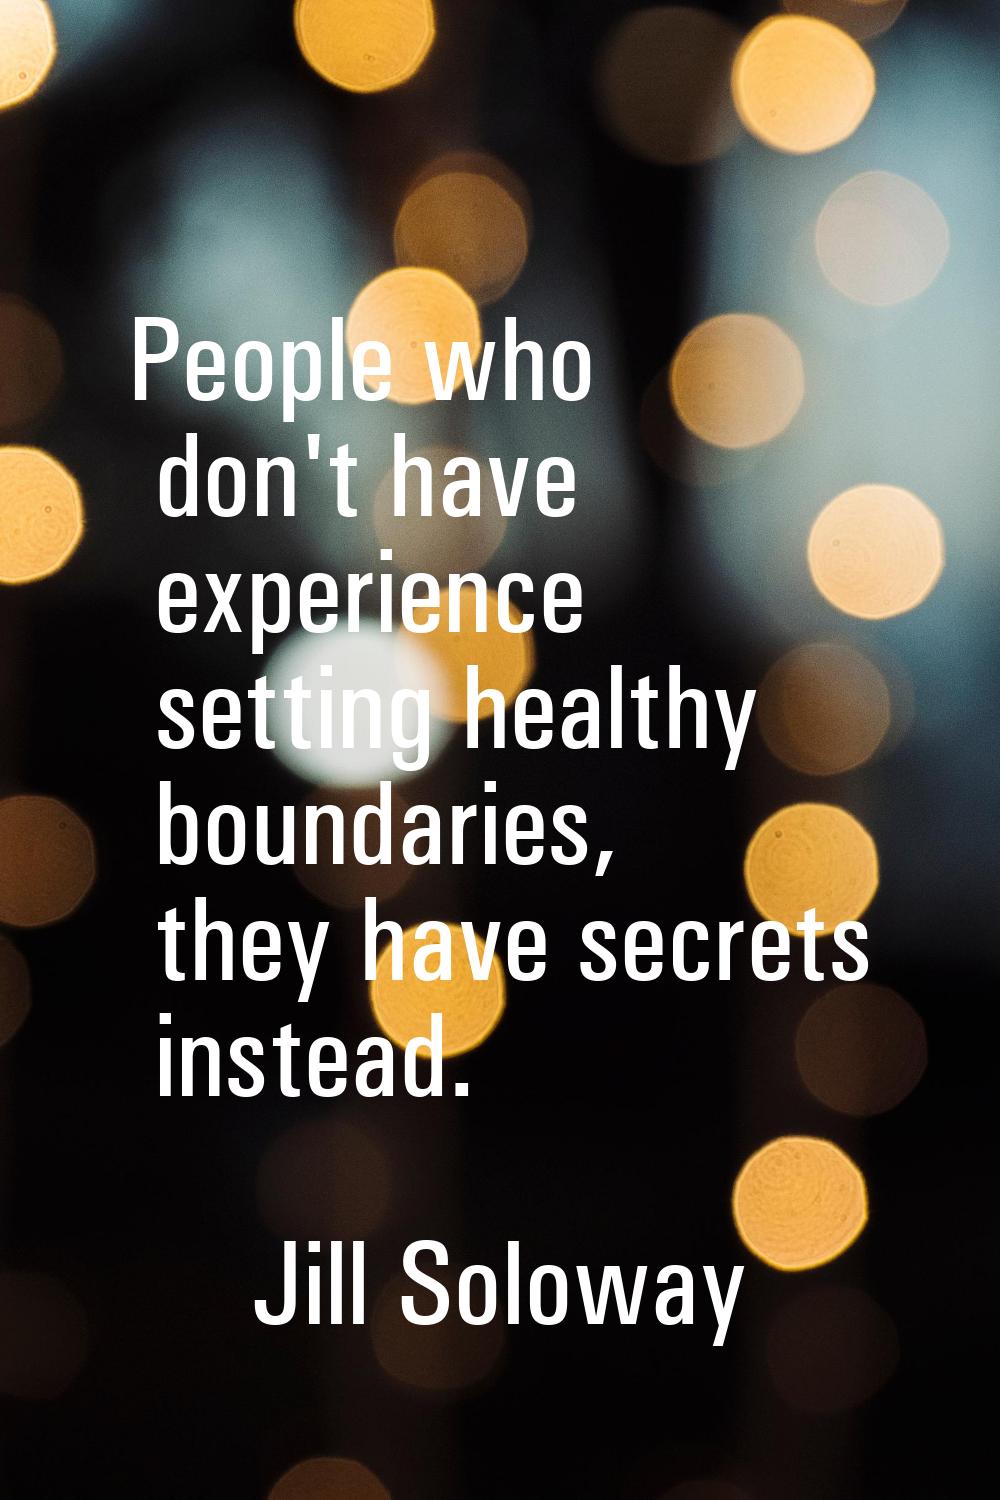 People who don't have experience setting healthy boundaries, they have secrets instead.